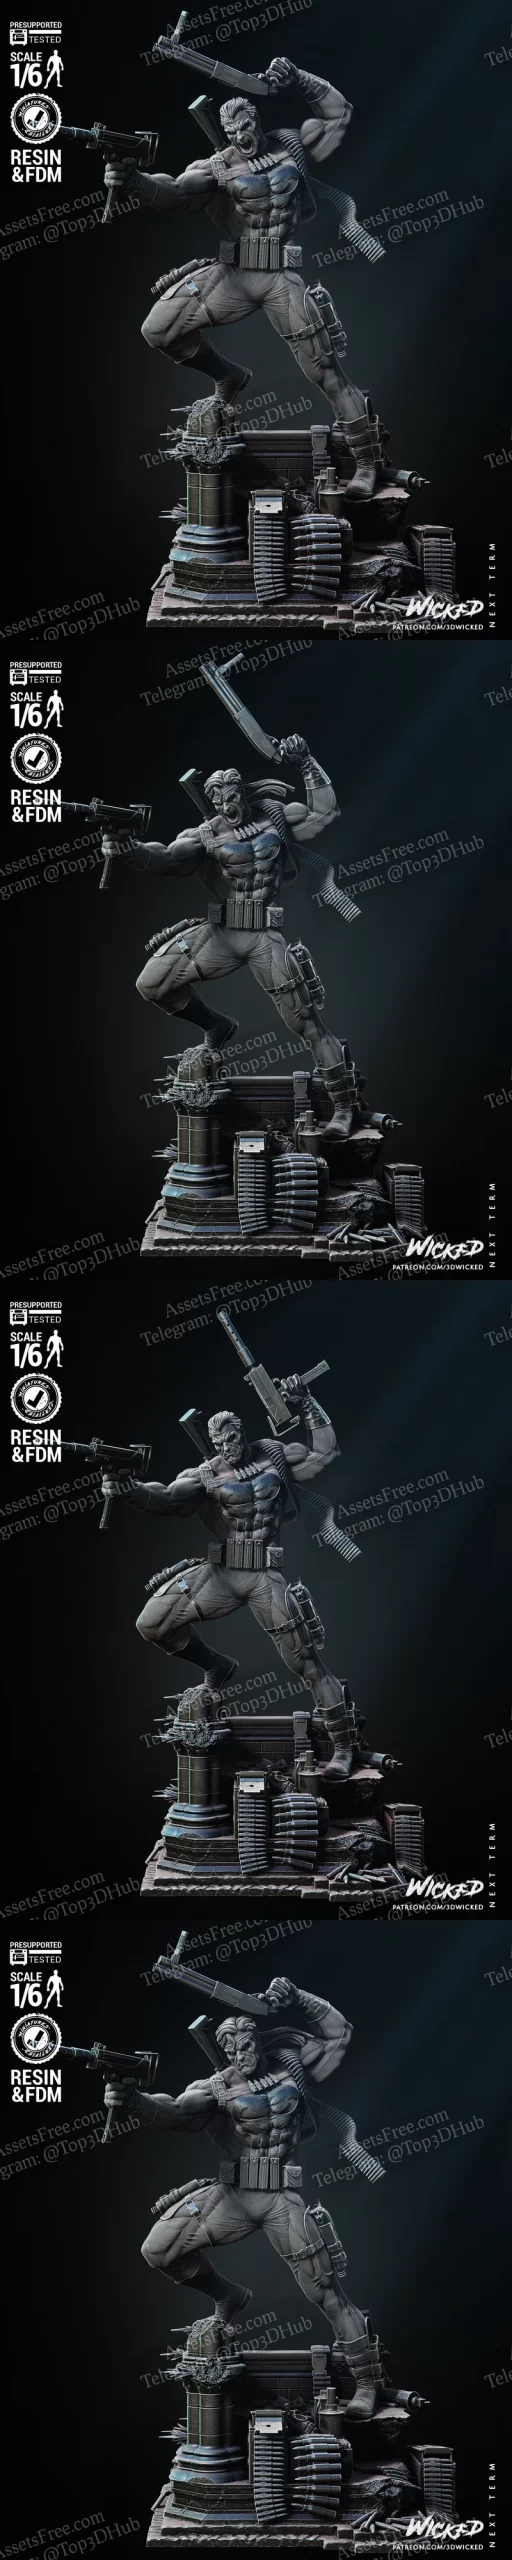 The Punisher Sculpture